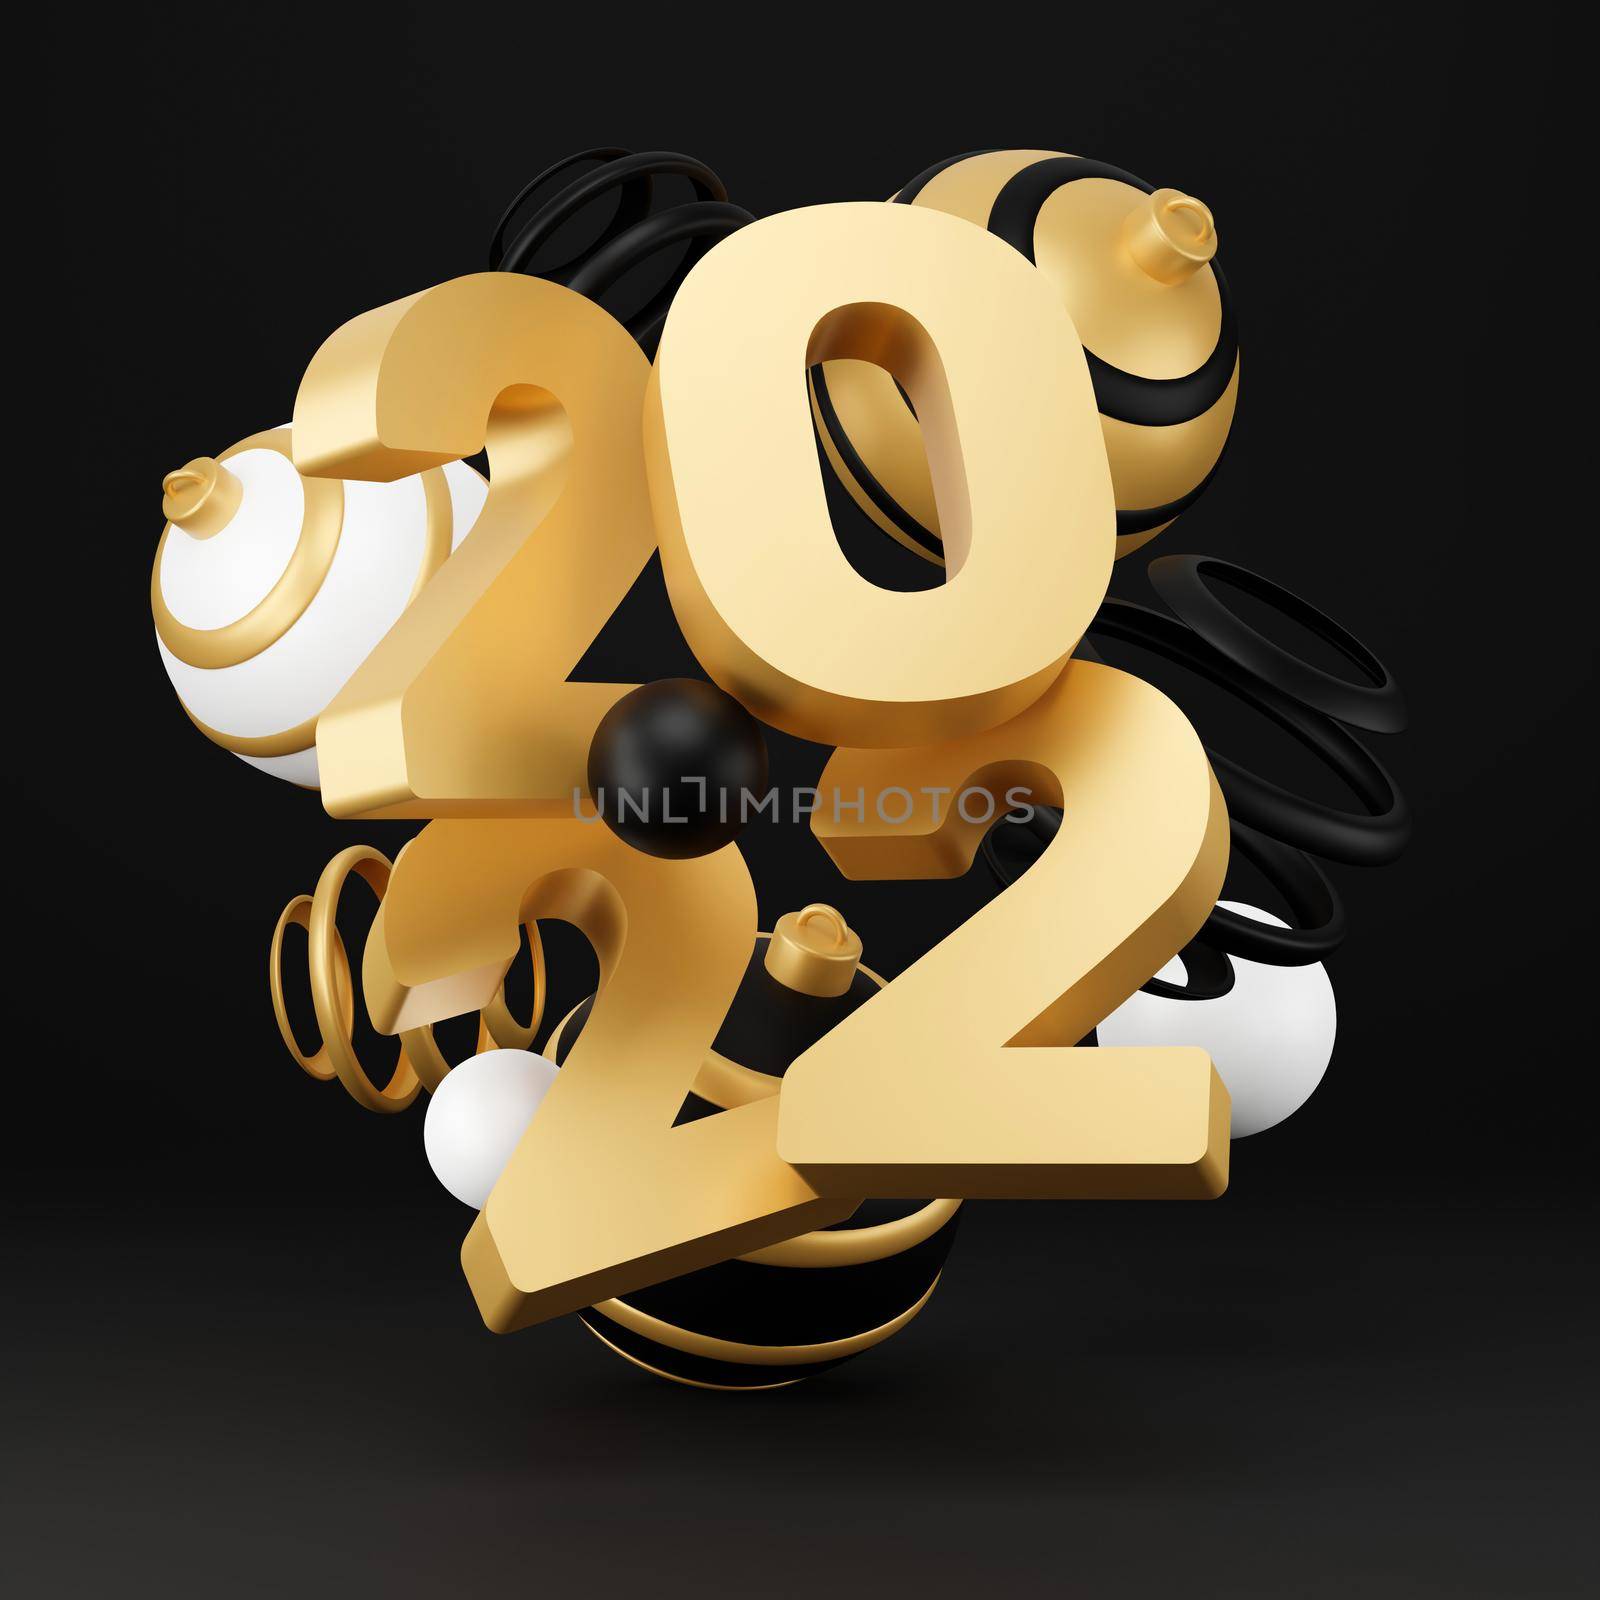 2022 new year abstract background with 3d spheres. black and gold Christmas luxury minimal concept. Decoration design for New Year. 3d rendering